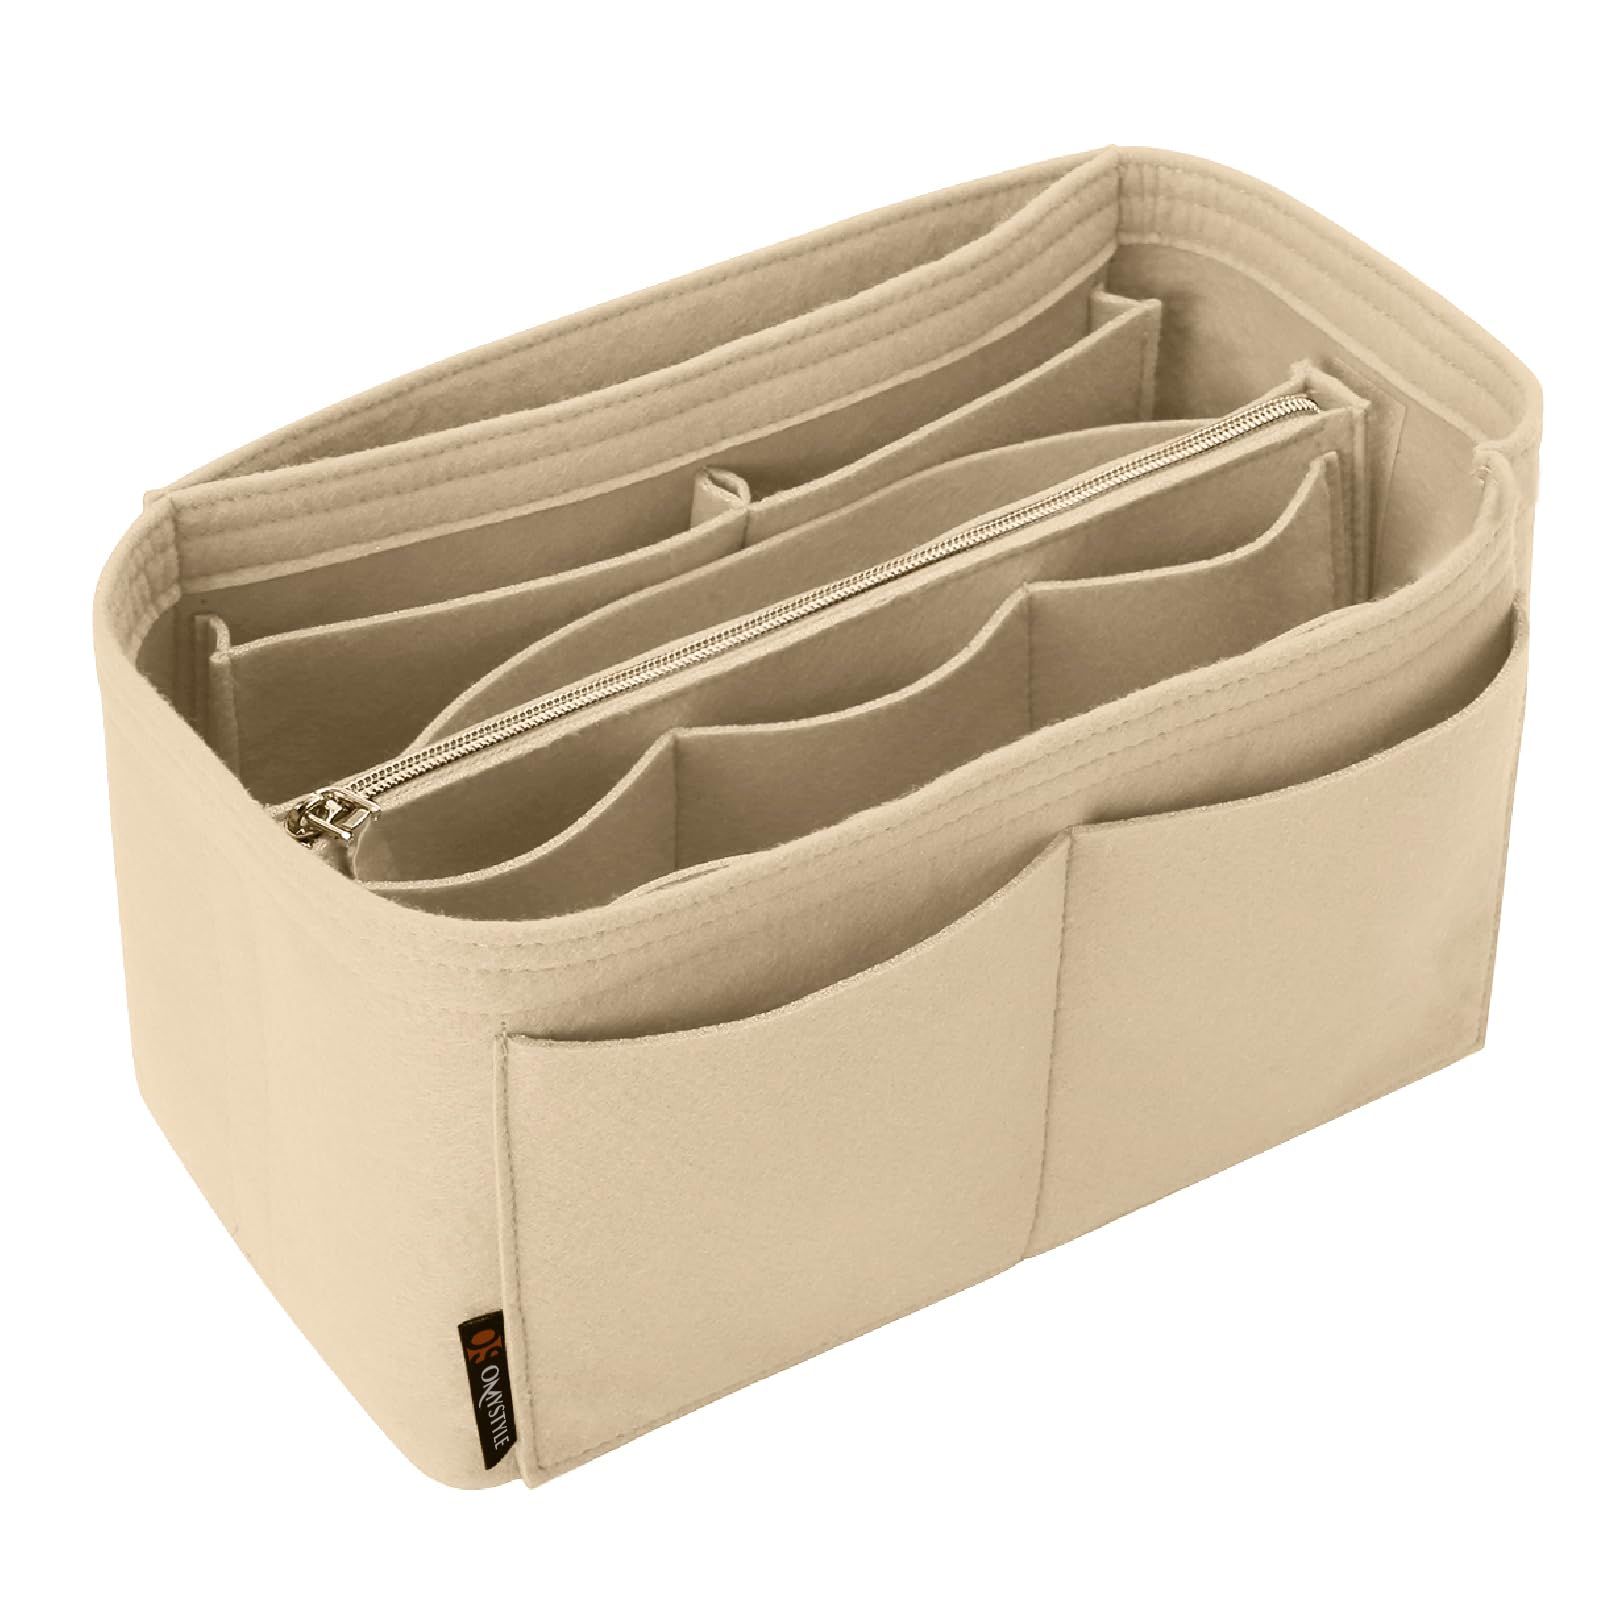 Best 5-Pieces 100L Large Clothes Storage Bag Organizer with Reinforced  Handle for Comforters, Blankets, Bedding, Collapsible Under Bed Storage -  Walmart.com